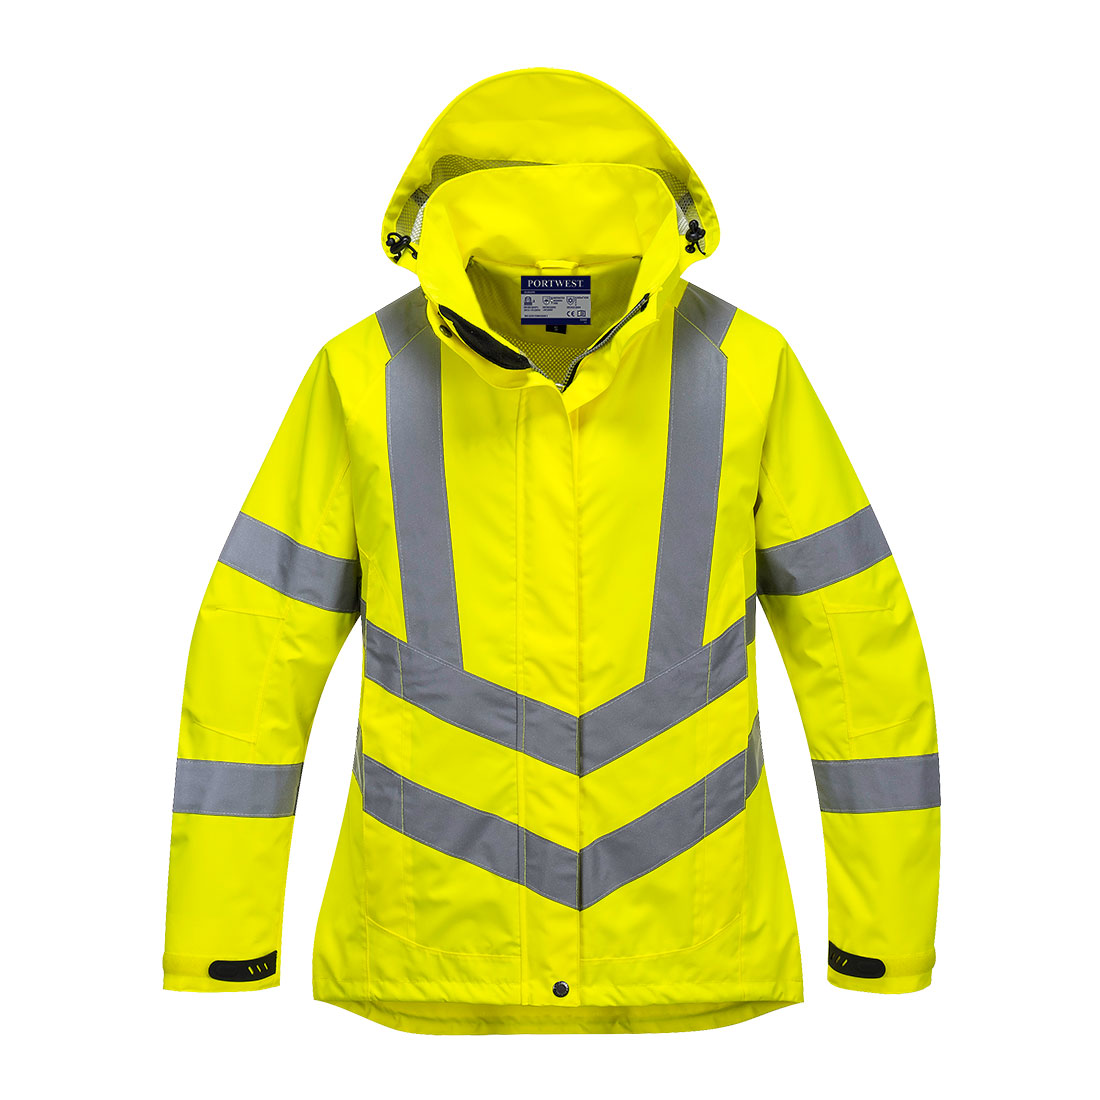 Ladies HiVis Breathable Jacket, Yellow     Size 3 XL R/Fit